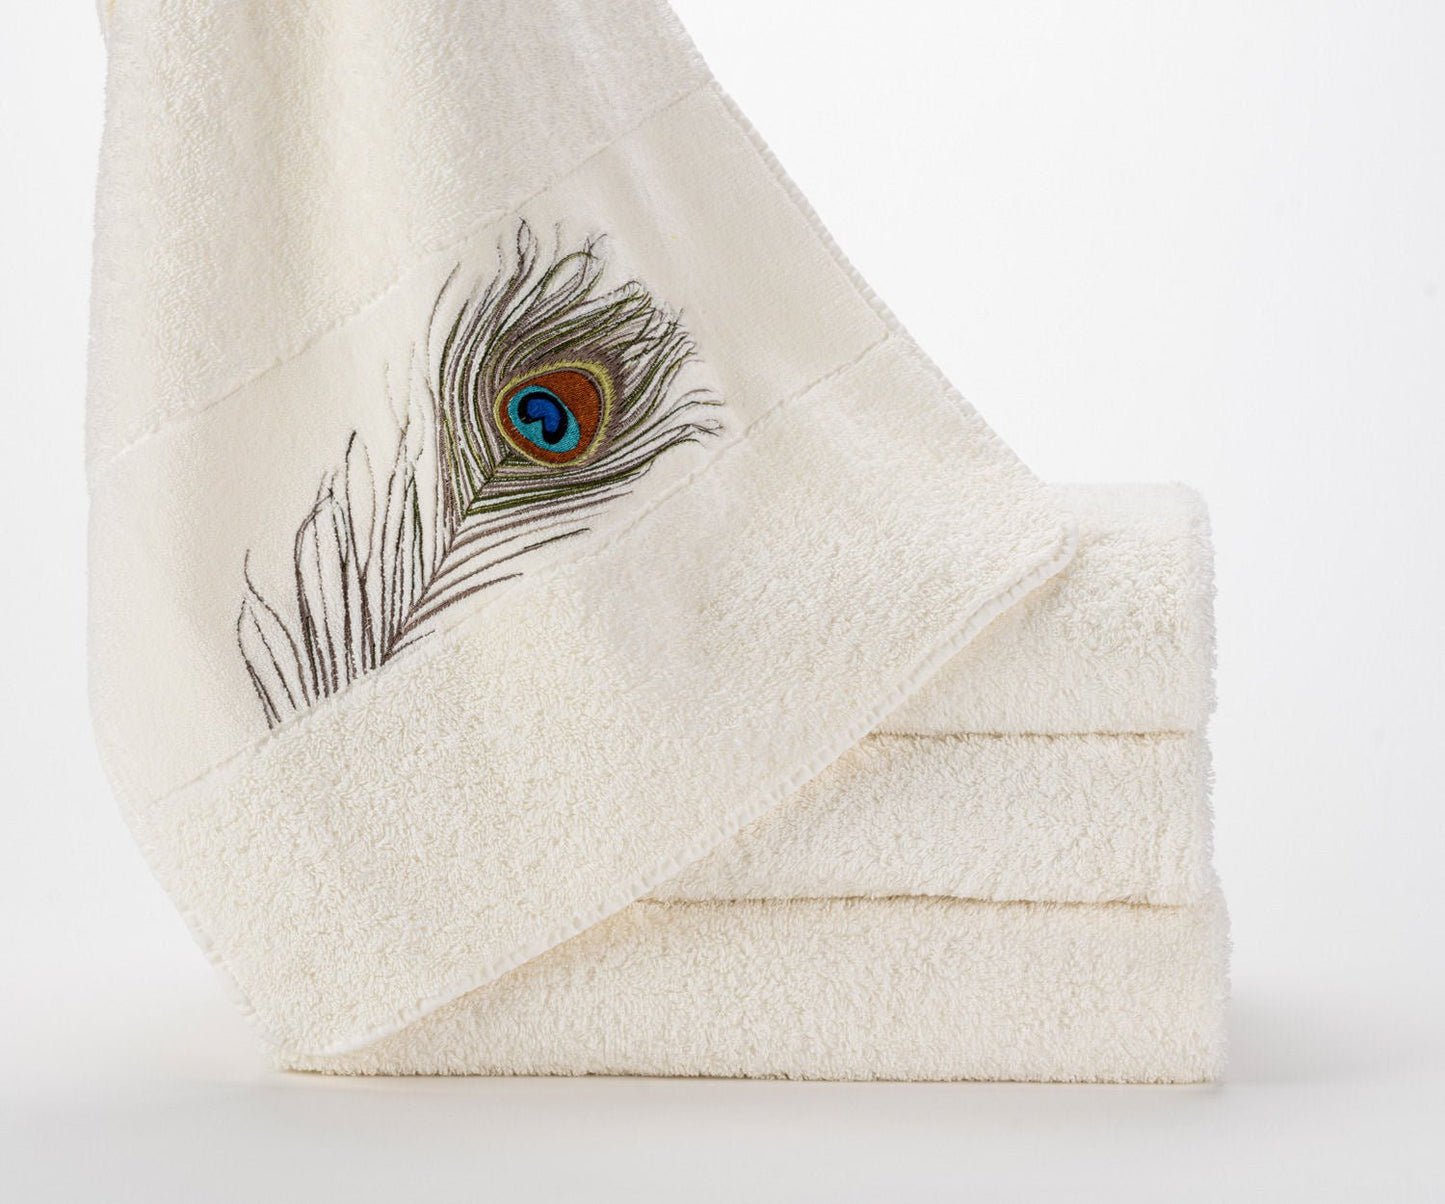 Paleon Luxury Egyptian Cotton Guest Towel by Abyss & Habidecor - |VESIMI Design| Luxury Bathrooms and Home Decor